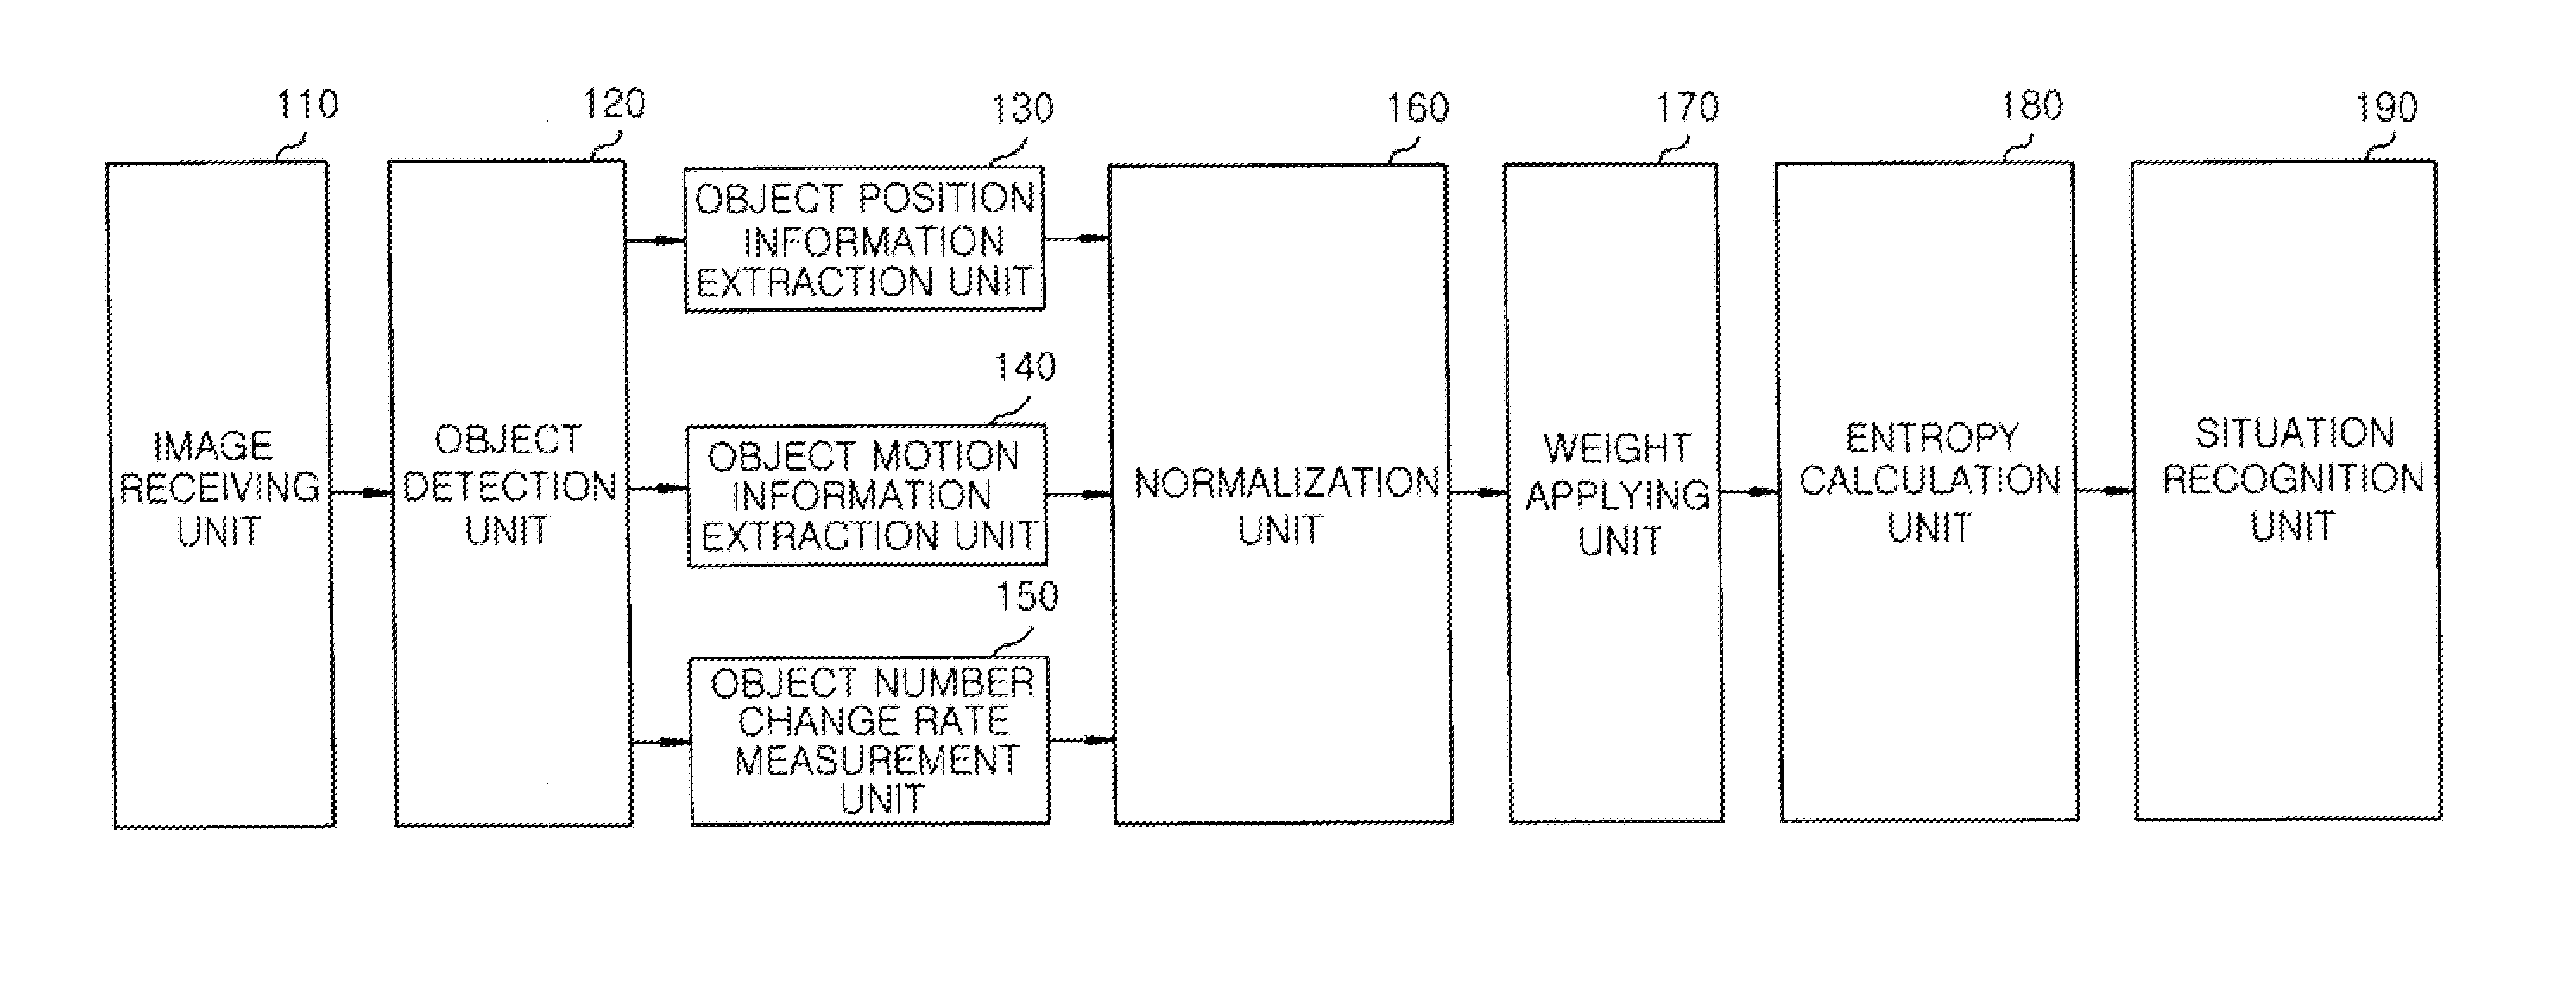 Situation recognition apparatus and method using object energy information